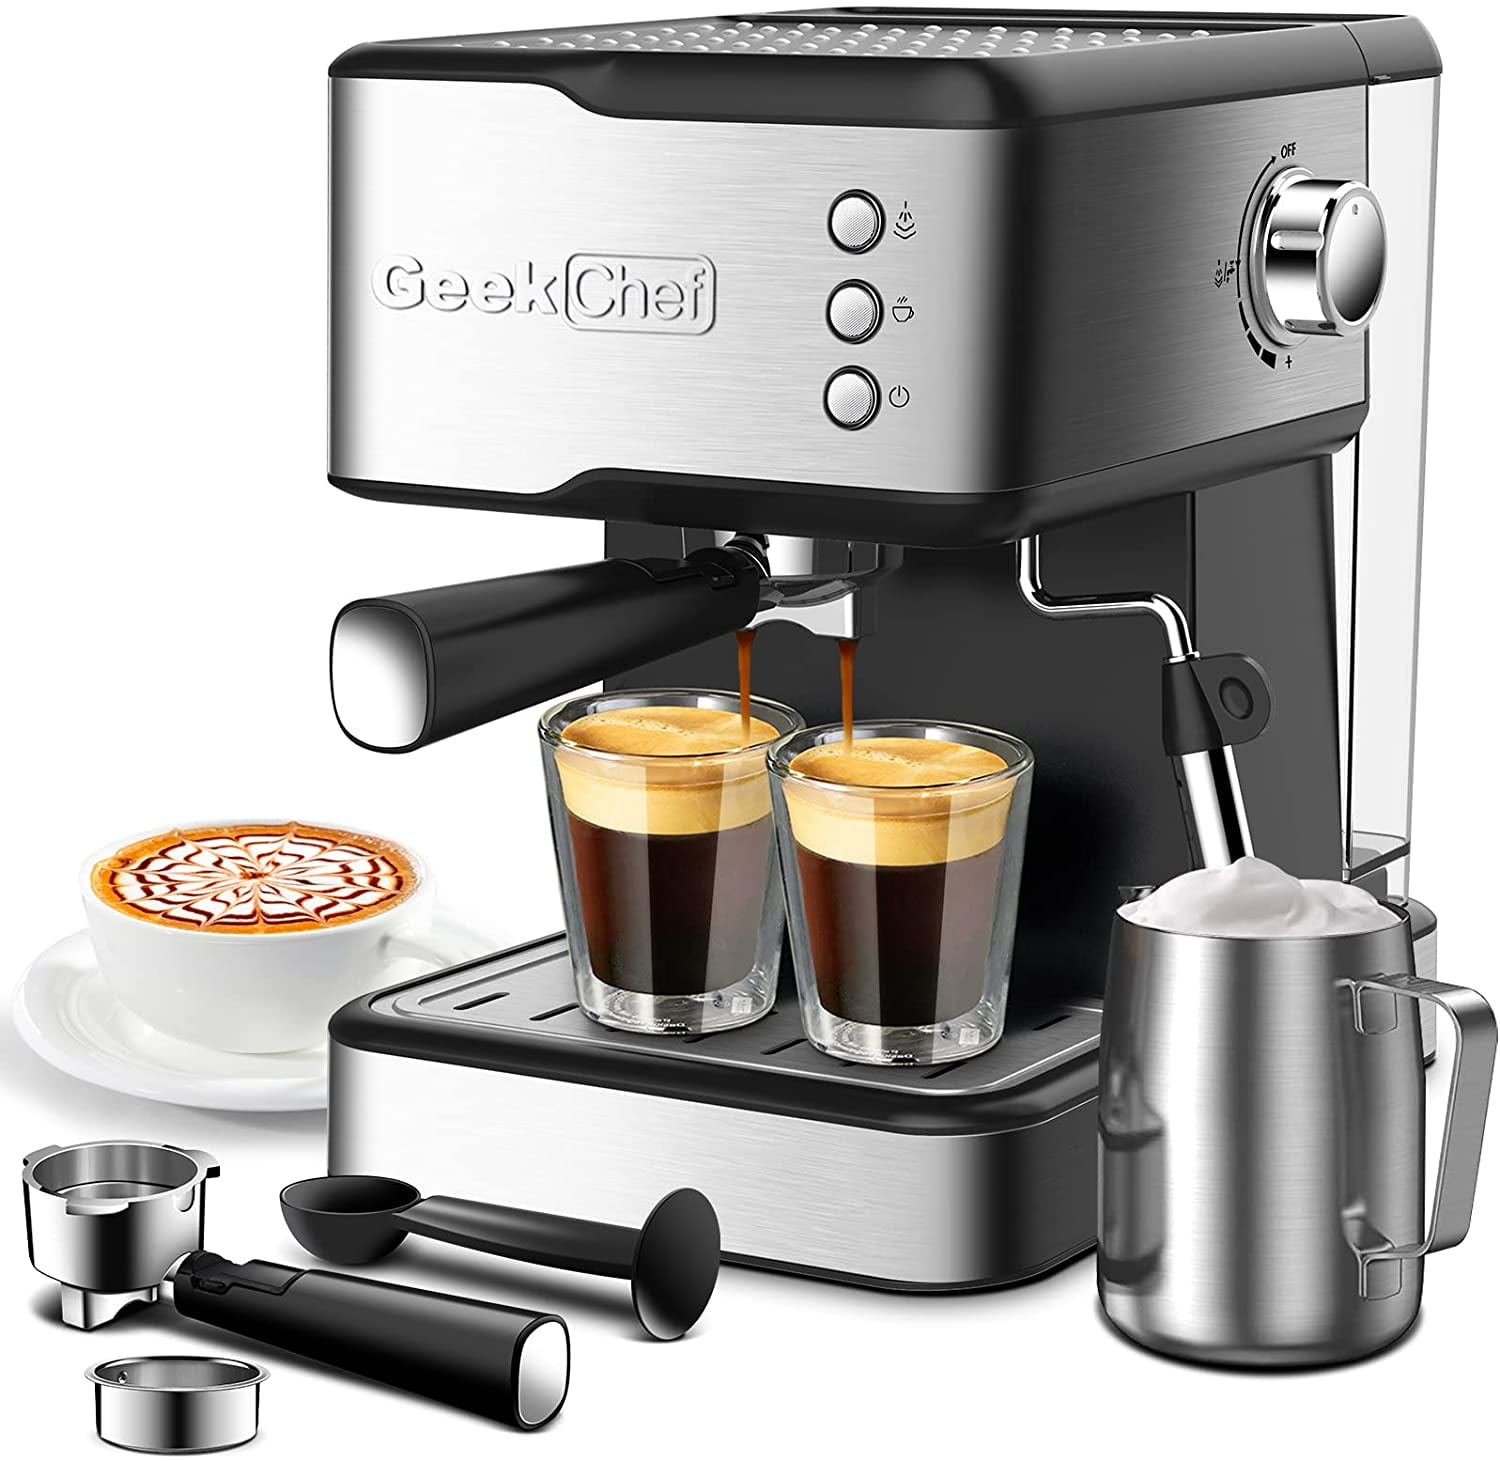  HOMOKUS Espresso Machine 20 Bar - Cappuccino Coffee Maker with  Milk Frother Steam Wand for Latte, Mocha, Cappuccino - Espresso Coffee  Machine for Home - 1350W - All Stainless Steel: Home & Kitchen